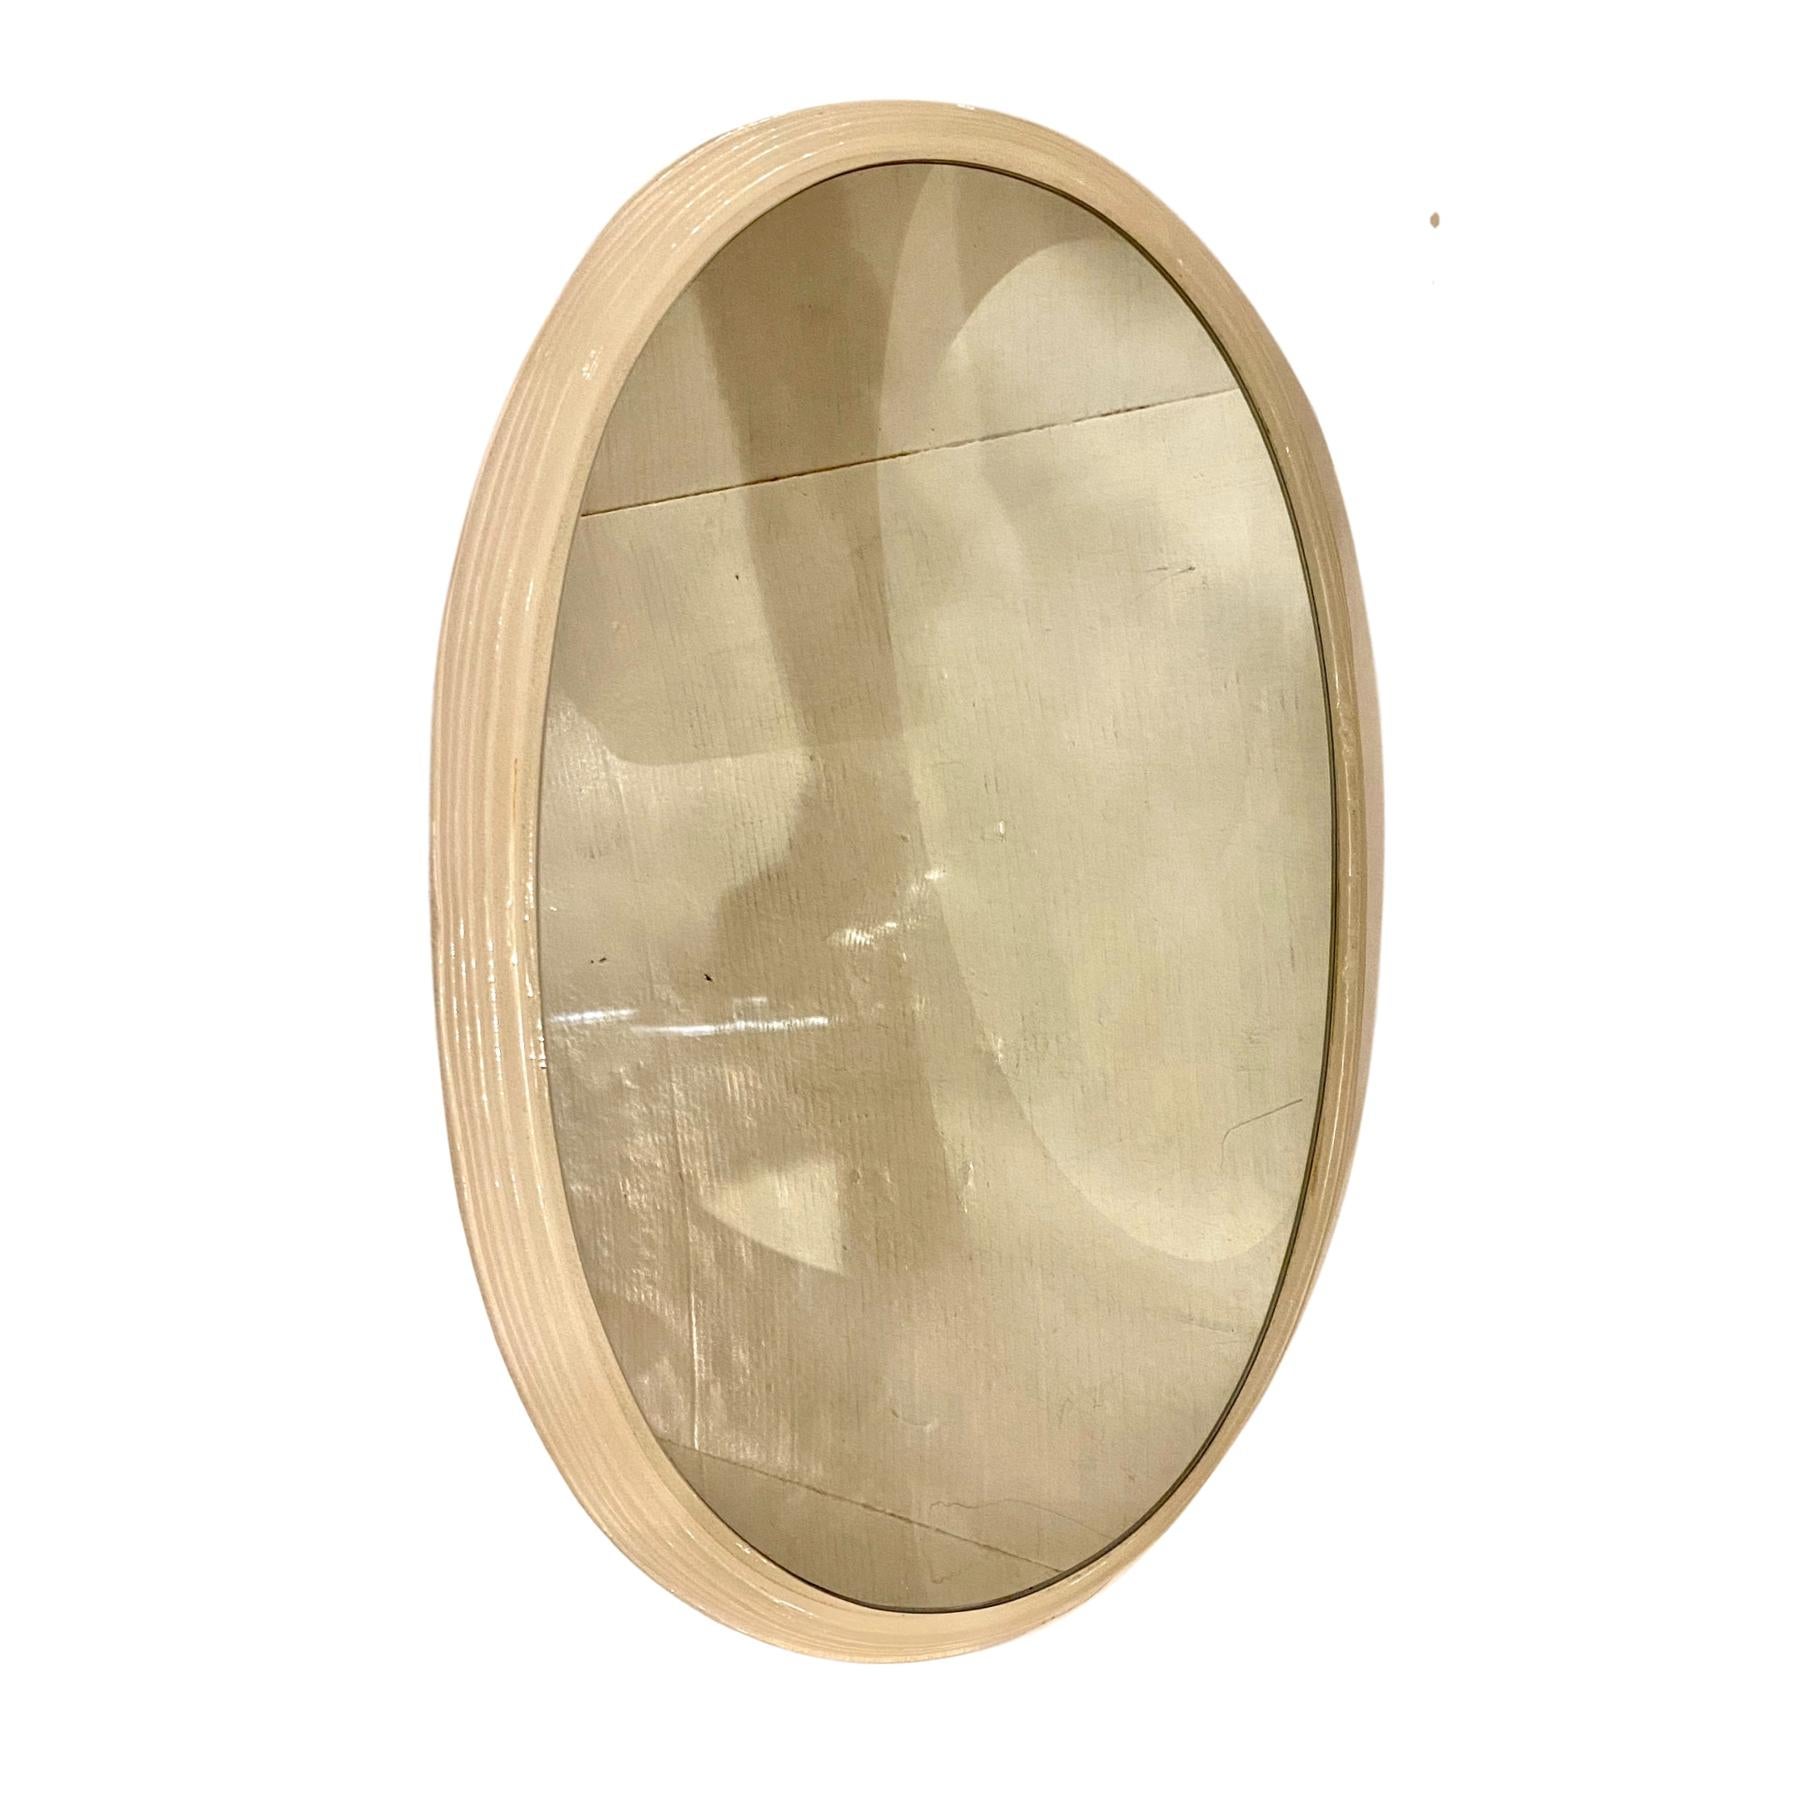 A circa 1960s Italian oval resin-framed mirror with backlight.

Measurements:
Height 24.5